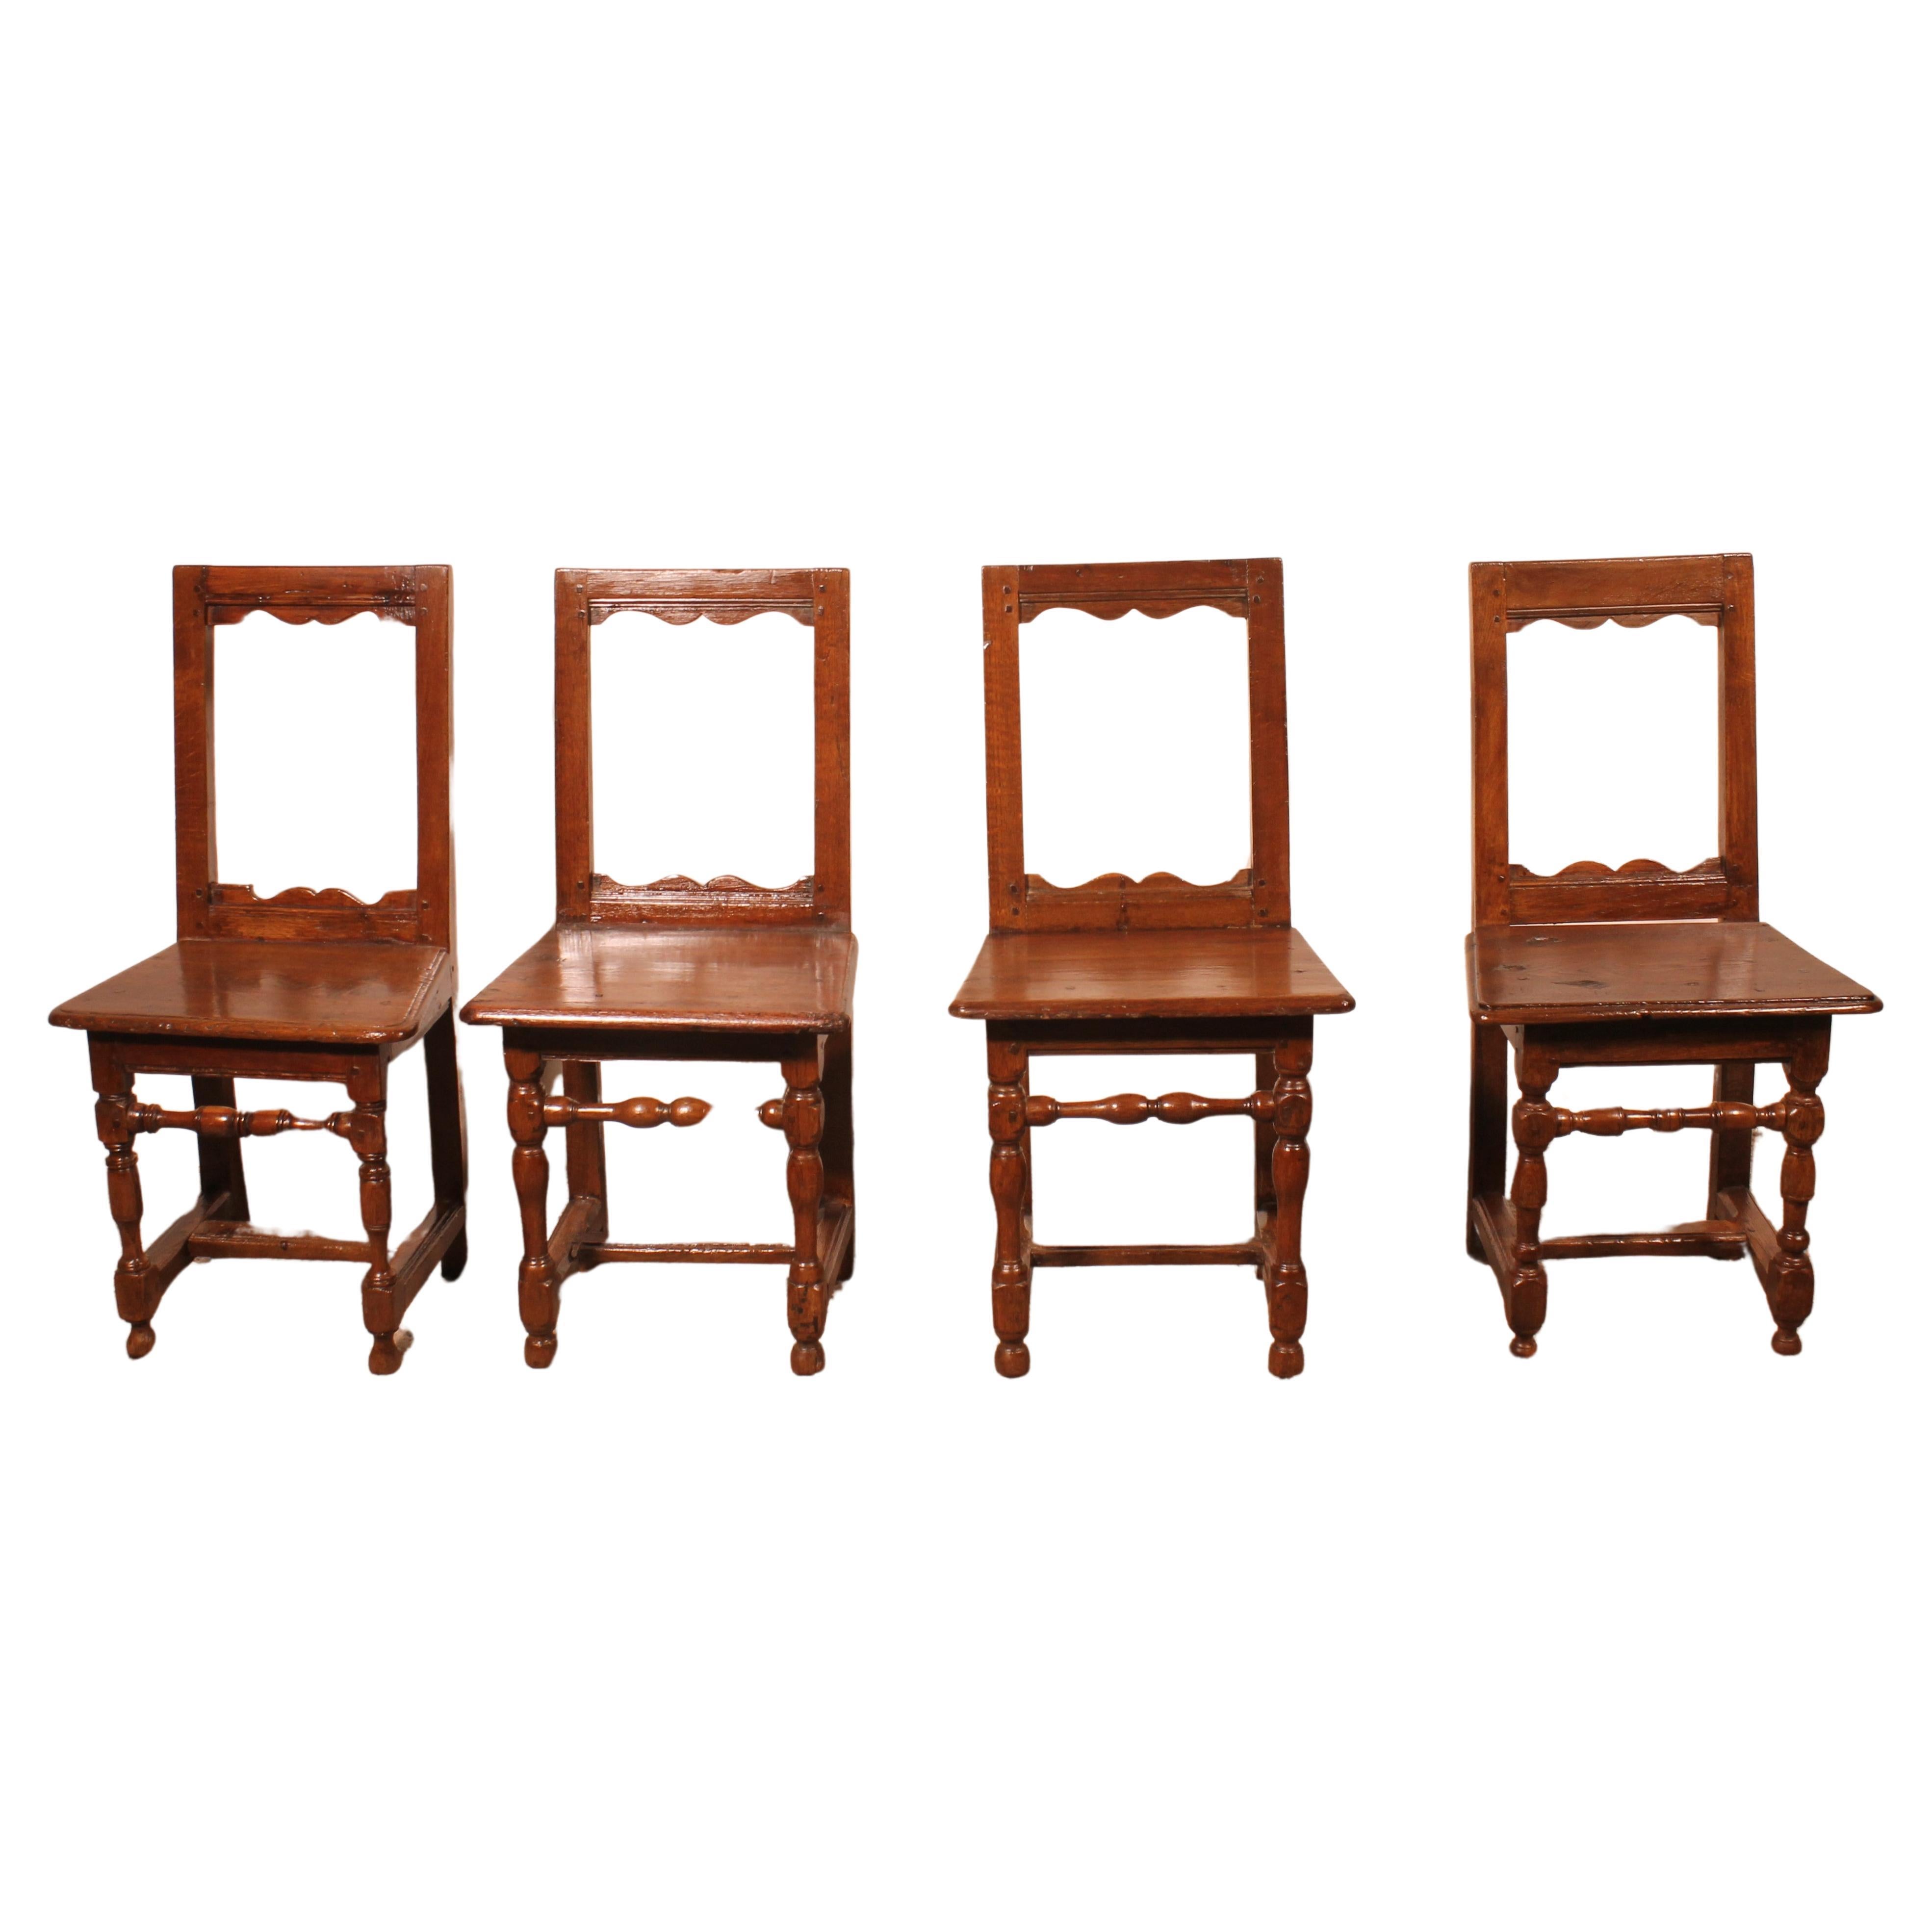 Set Of 4 Lorraine Chairs From The 18th Century In Oak For Sale